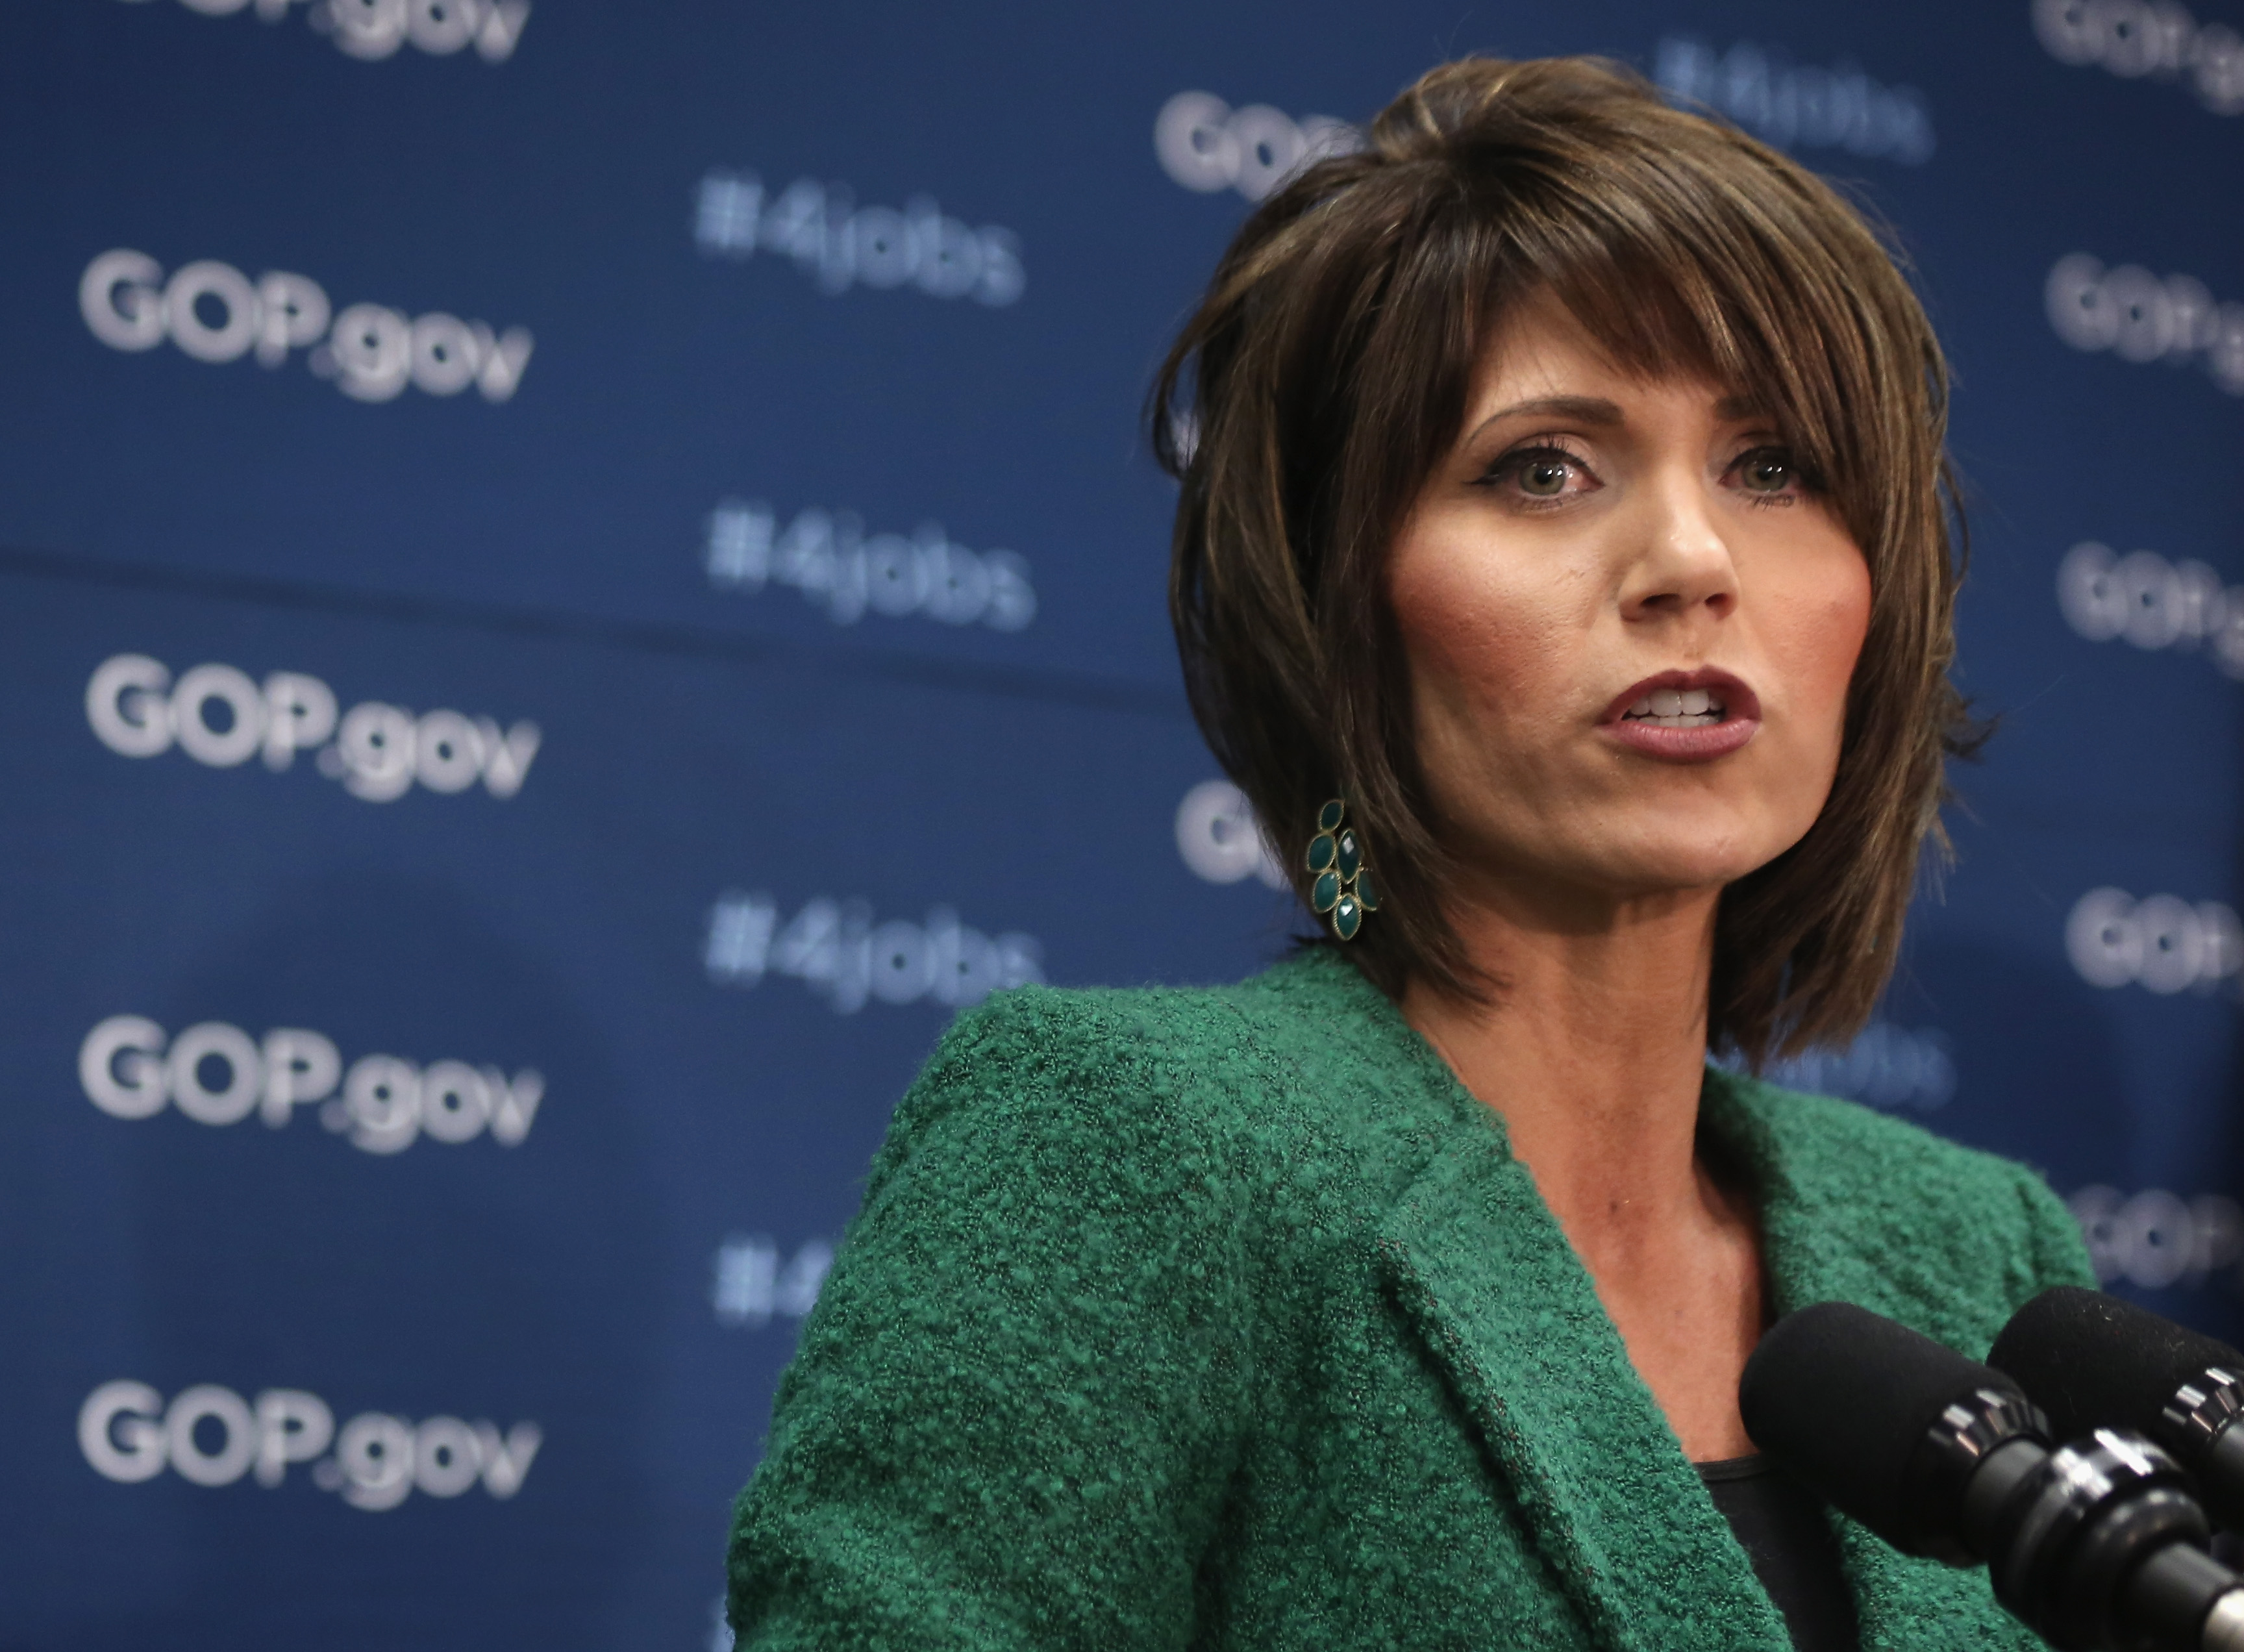 WASHINGTON, DC - JANUARY 14: U.S. Rep. Kristi Noem (R-SD) speaks during a news briefing after a House Republican Conference meeting January 14, 2014 on Capitol Hill in Washington, DC. Congressional negotiators have reached to an agreement of a $1.1 trillion spending bill to avoid another government shutdown when the current funding ends tomorrow. (Photo by Alex Wong/Getty Images)